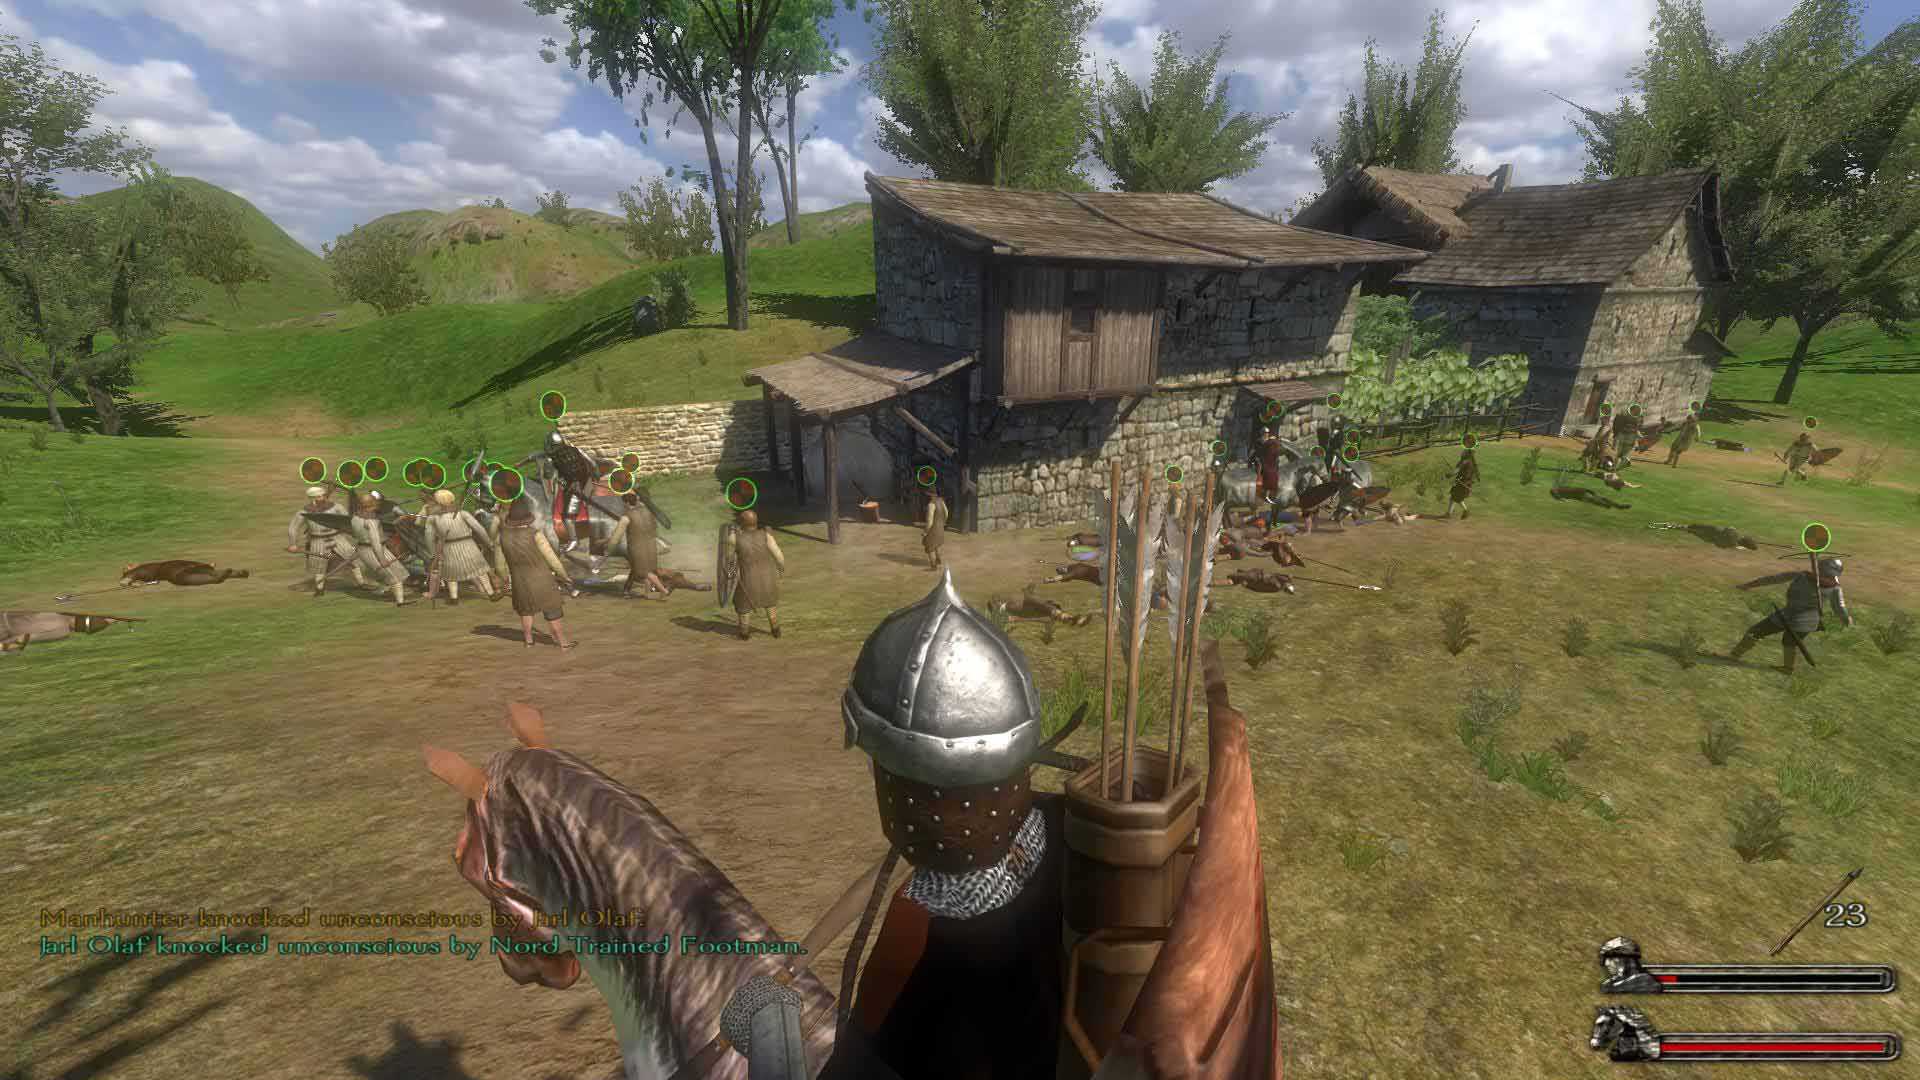 Mount and blade game. Mount & Blade: Warband. Игра Mount & Blade 3. Mount & Blade: огнём и мечом. Mount and Blade Warband 2010.